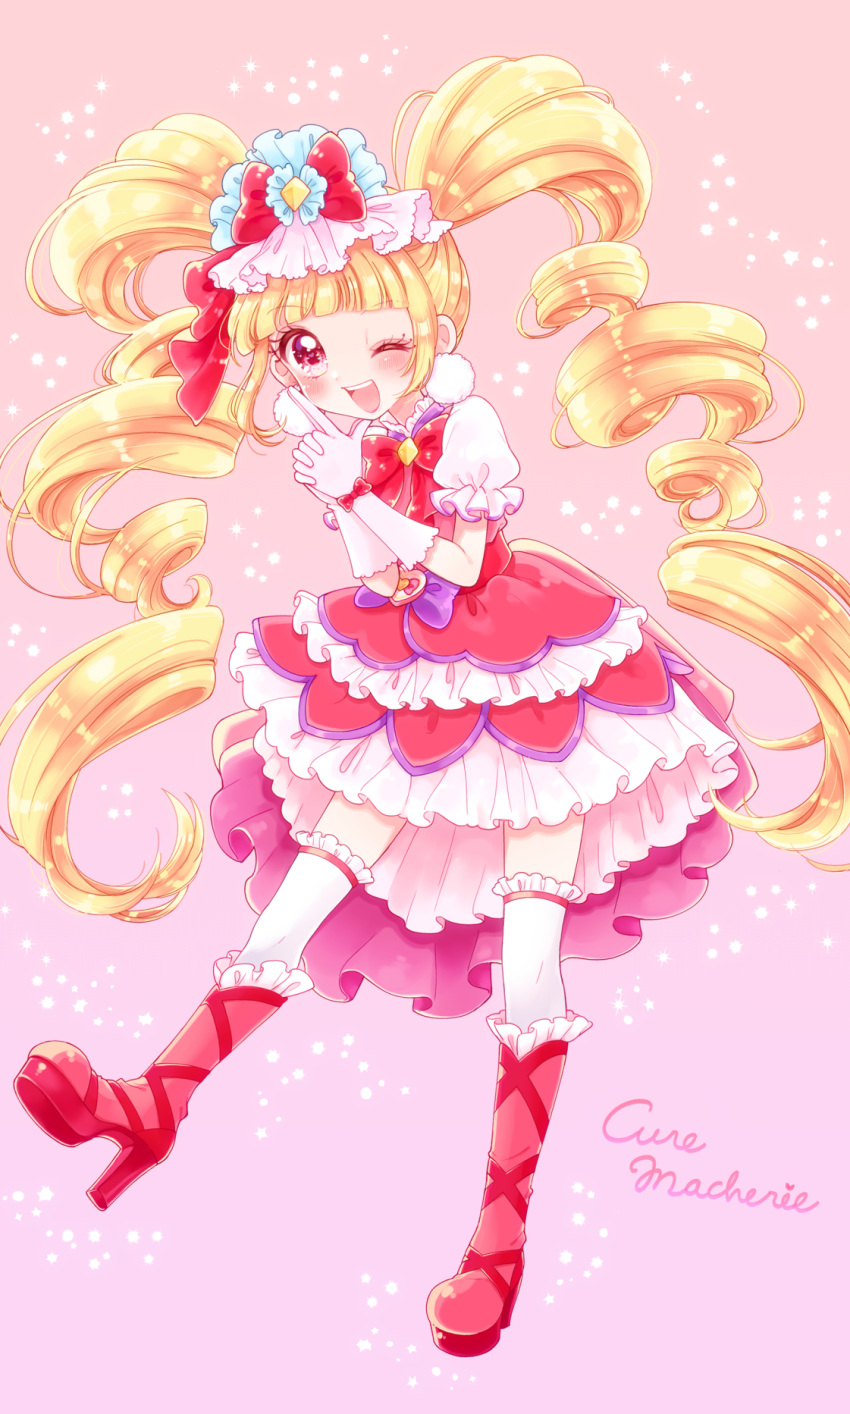 1girl ;d aisaki_emiru blonde_hair boots bow character_name cure_macherie curly_hair diamond-shaped_brooch dress earrings frilled_legwear gloves gradient gradient_background hair_bow highres hugtto!_precure jewelry knee_boots kuzumochi layered_dress legs_apart long_hair looking_at_viewer magical_girl one_eye_closed open_mouth pink_background pom_pom_(clothes) pom_pom_earrings pouch precure purple_bow red_bow red_dress red_eyes red_footwear shiny shiny_hair smile solo thigh-highs twintails waist_bow white_gloves white_legwear